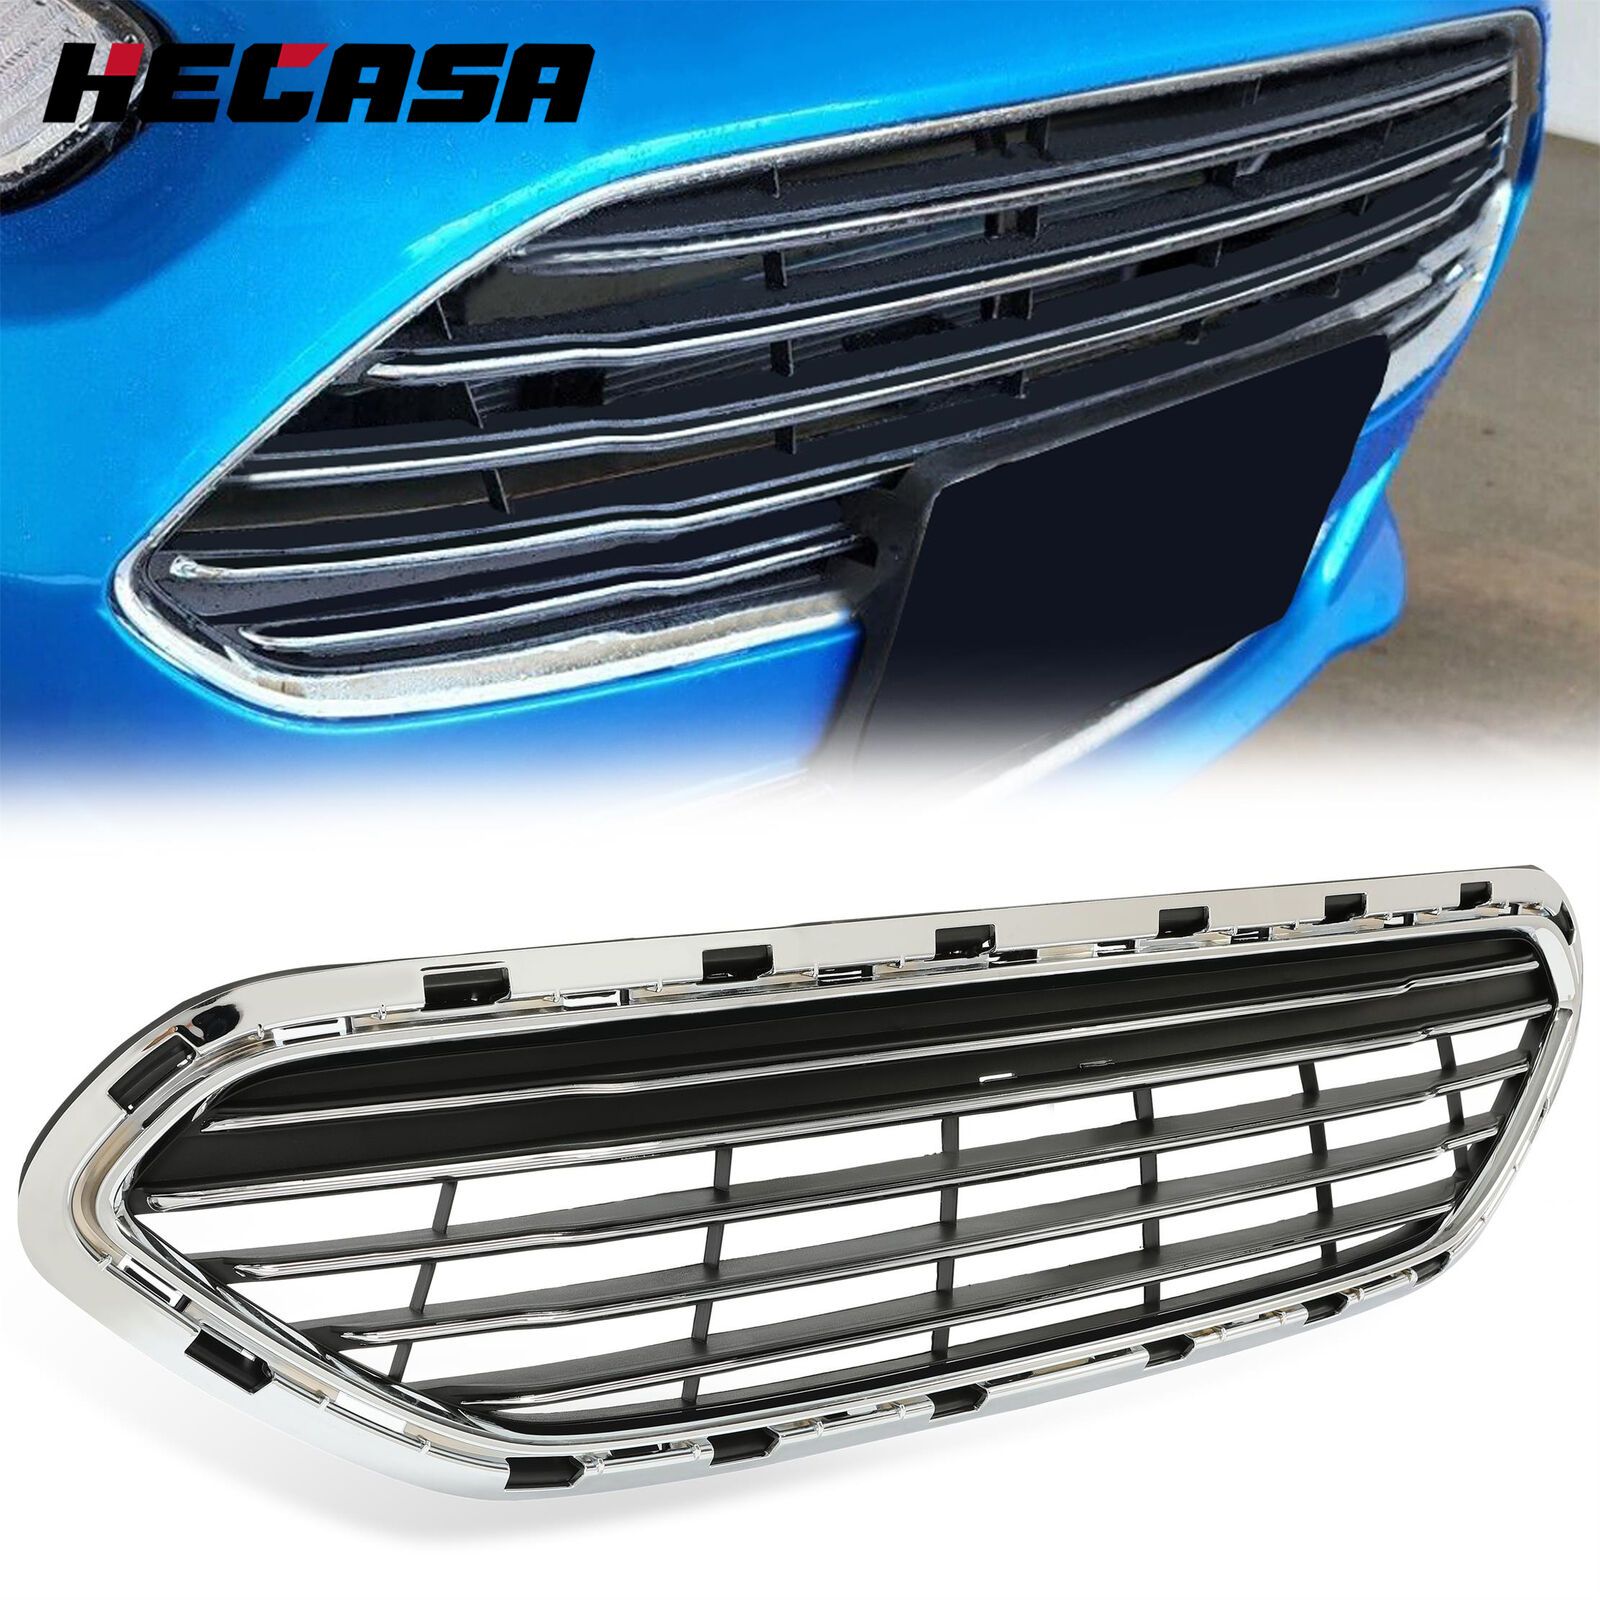 HECASA Front Chrome Upper Grille Grill FOR 2014-2019 Ford Fiesta 4DR 15 16 17 18